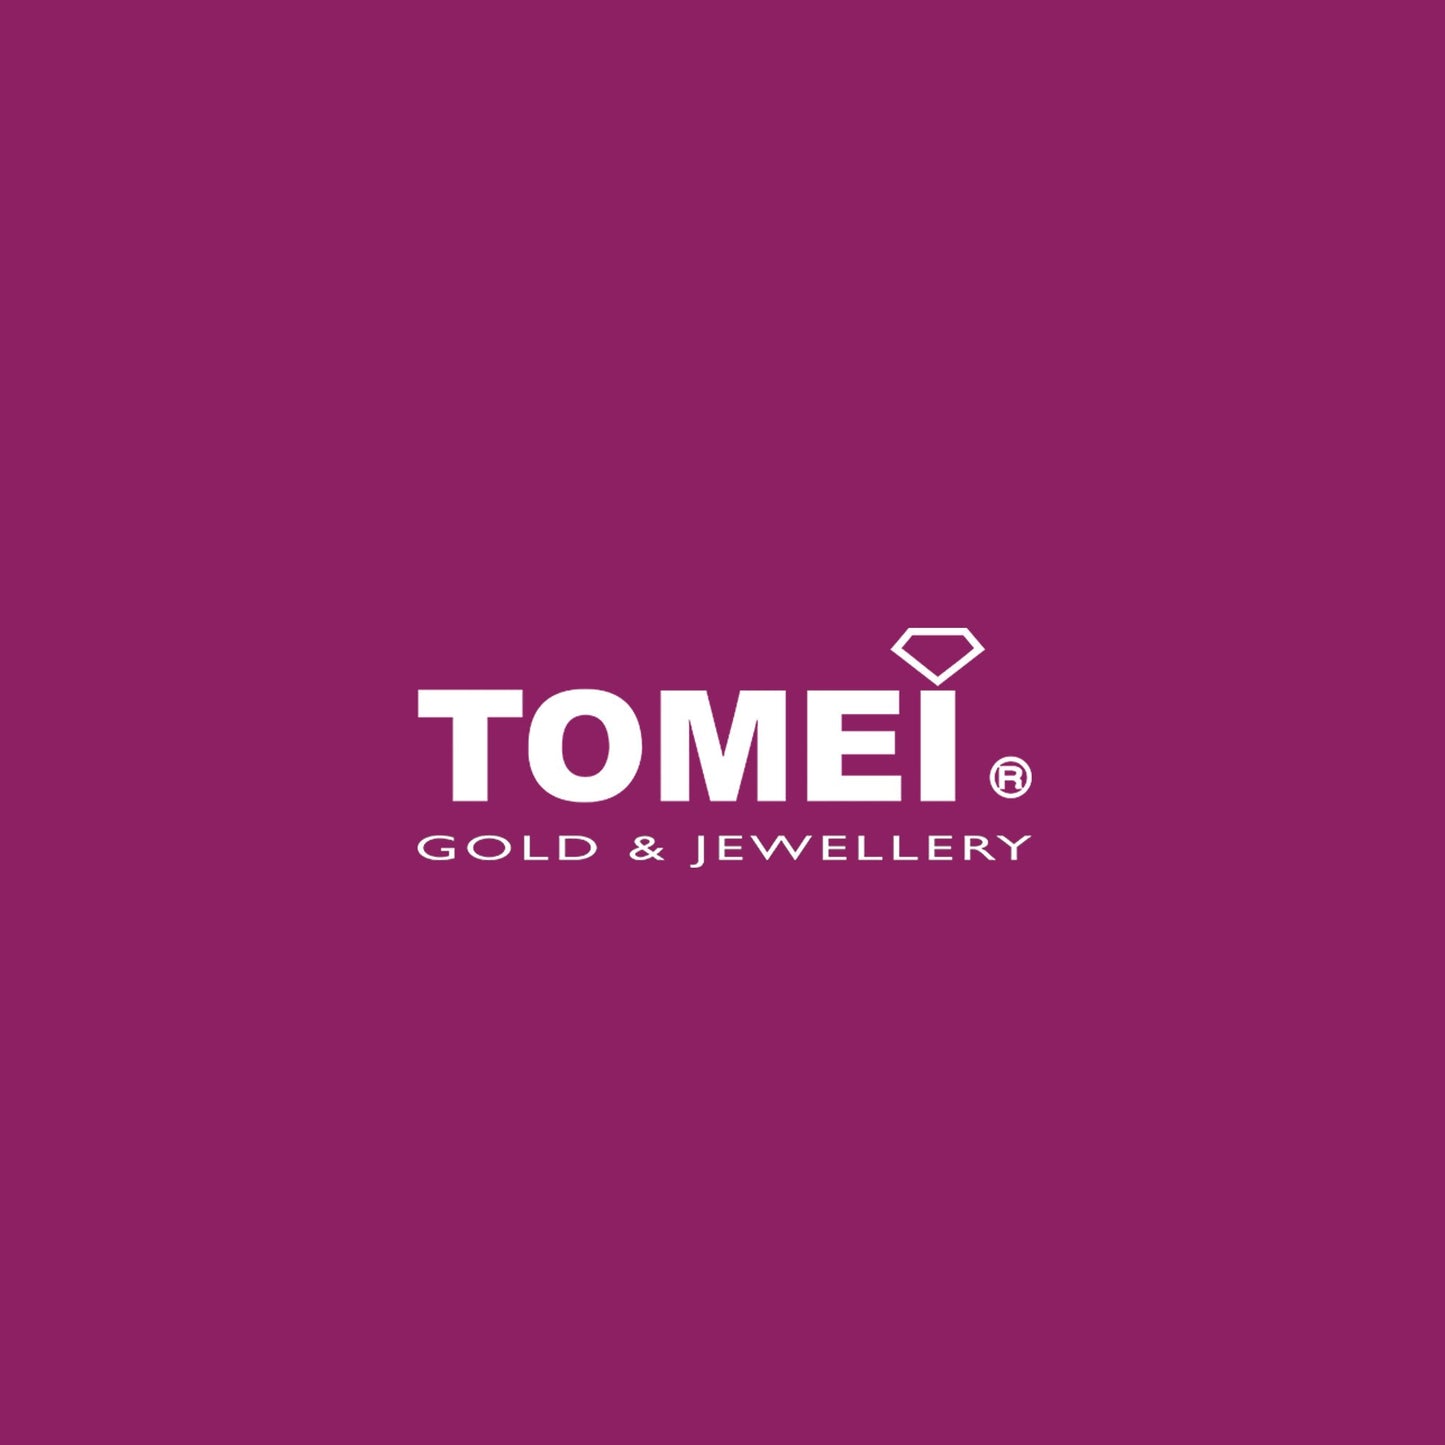 TOMEI Lusso Italia Baubles Glam Collection Tri-Tone Earrings, Yellow Gold 916